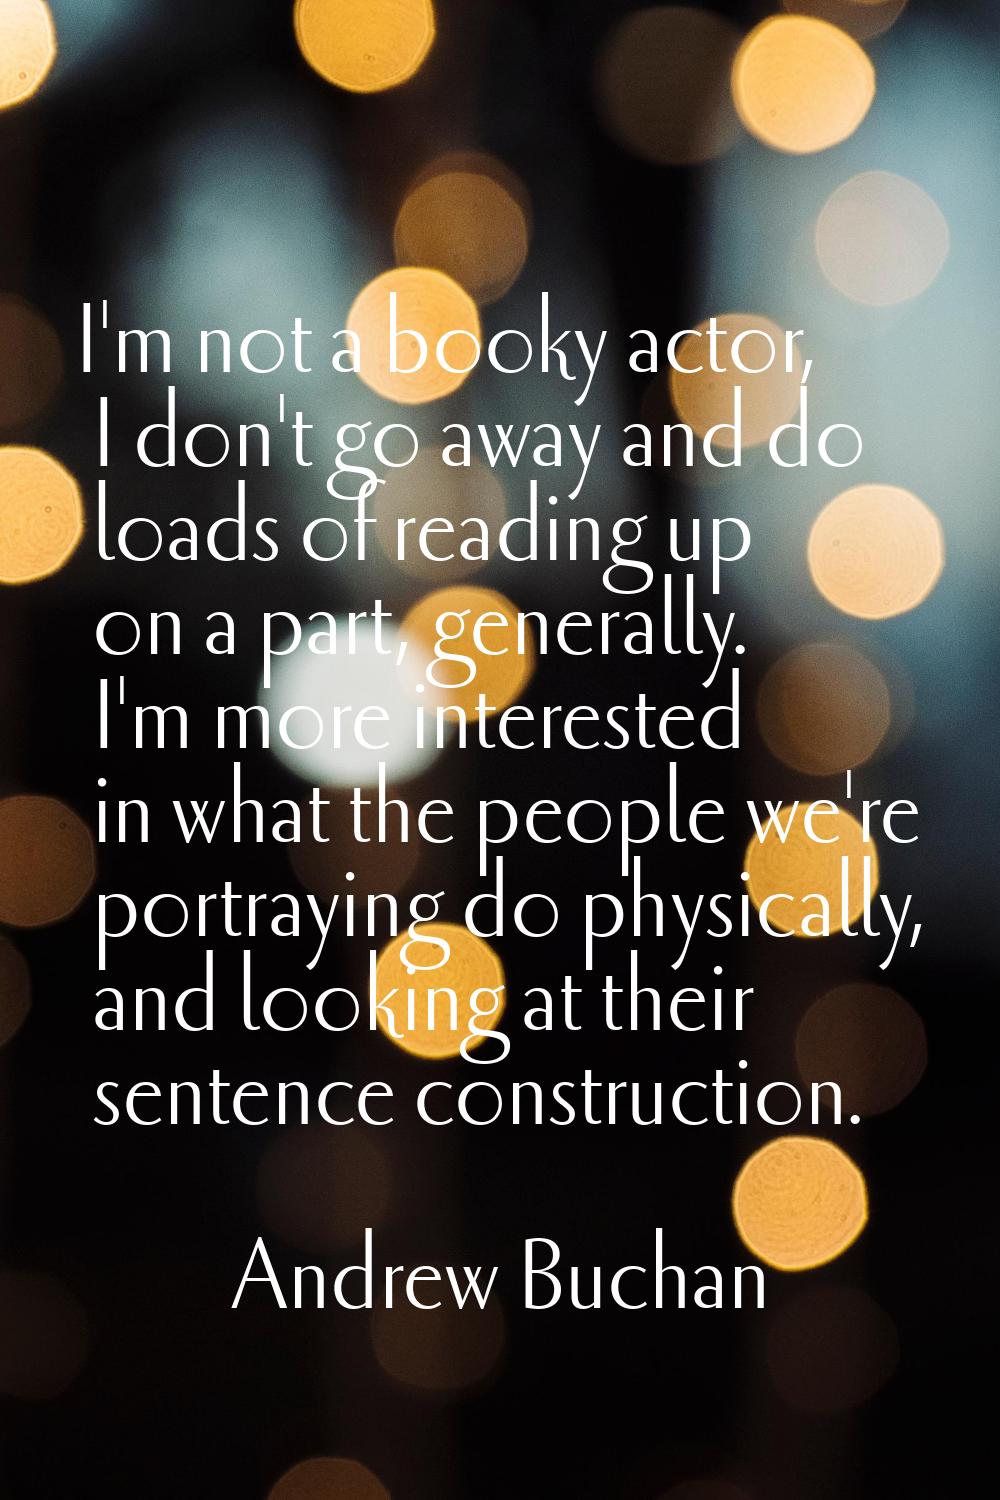 I'm not a booky actor, I don't go away and do loads of reading up on a part, generally. I'm more in